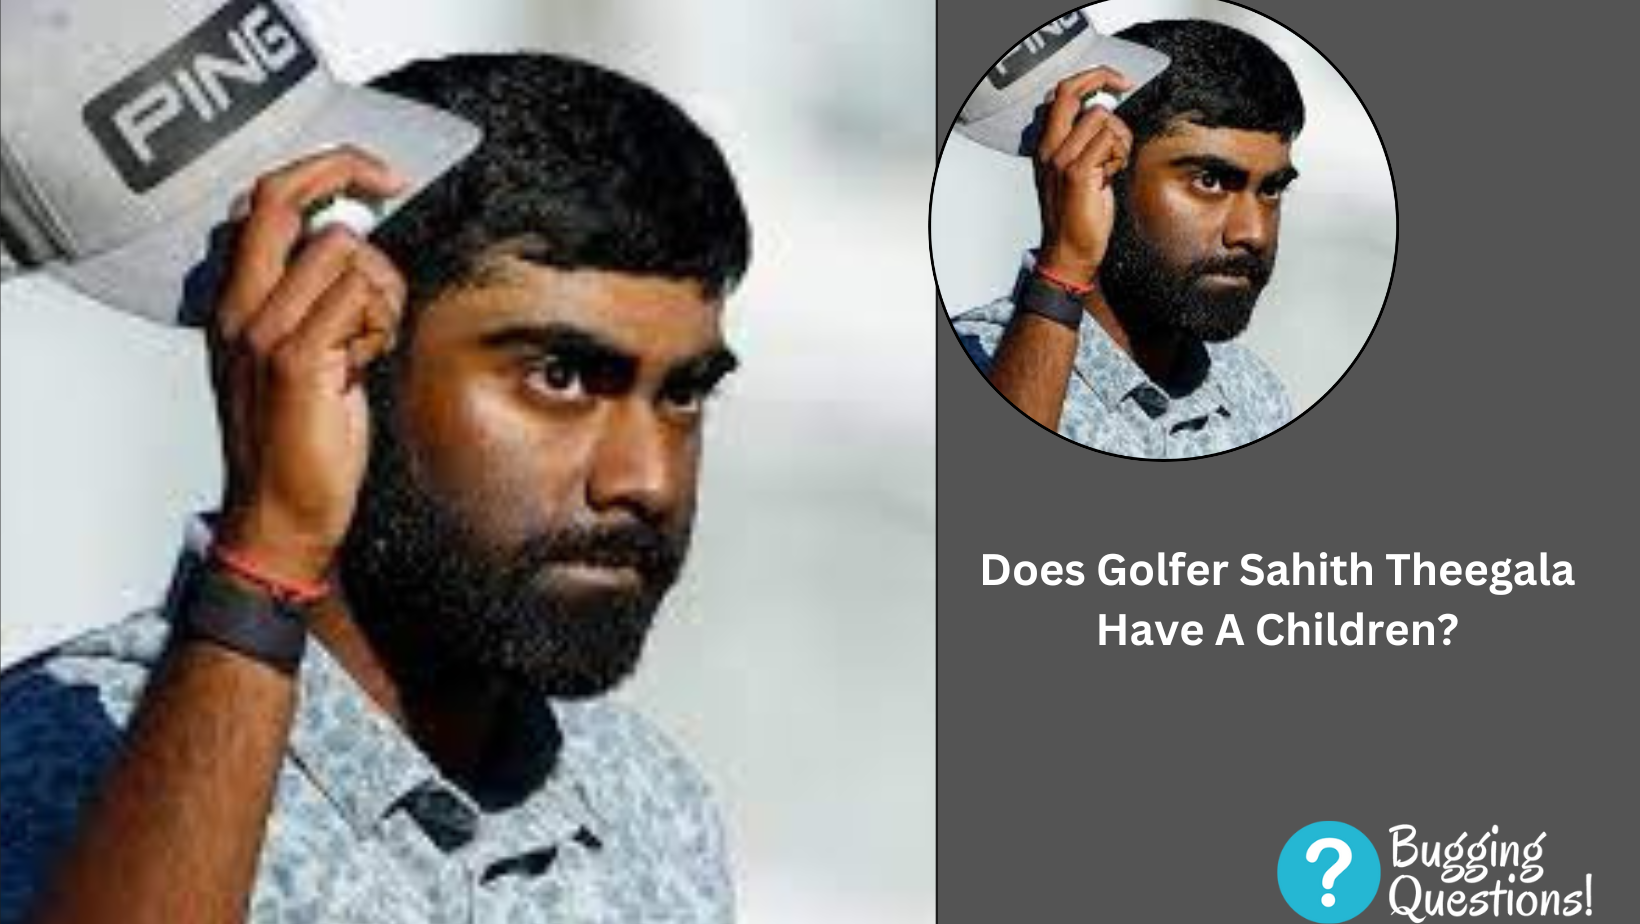 Does Golfer Sahith Theegala Have A Children?